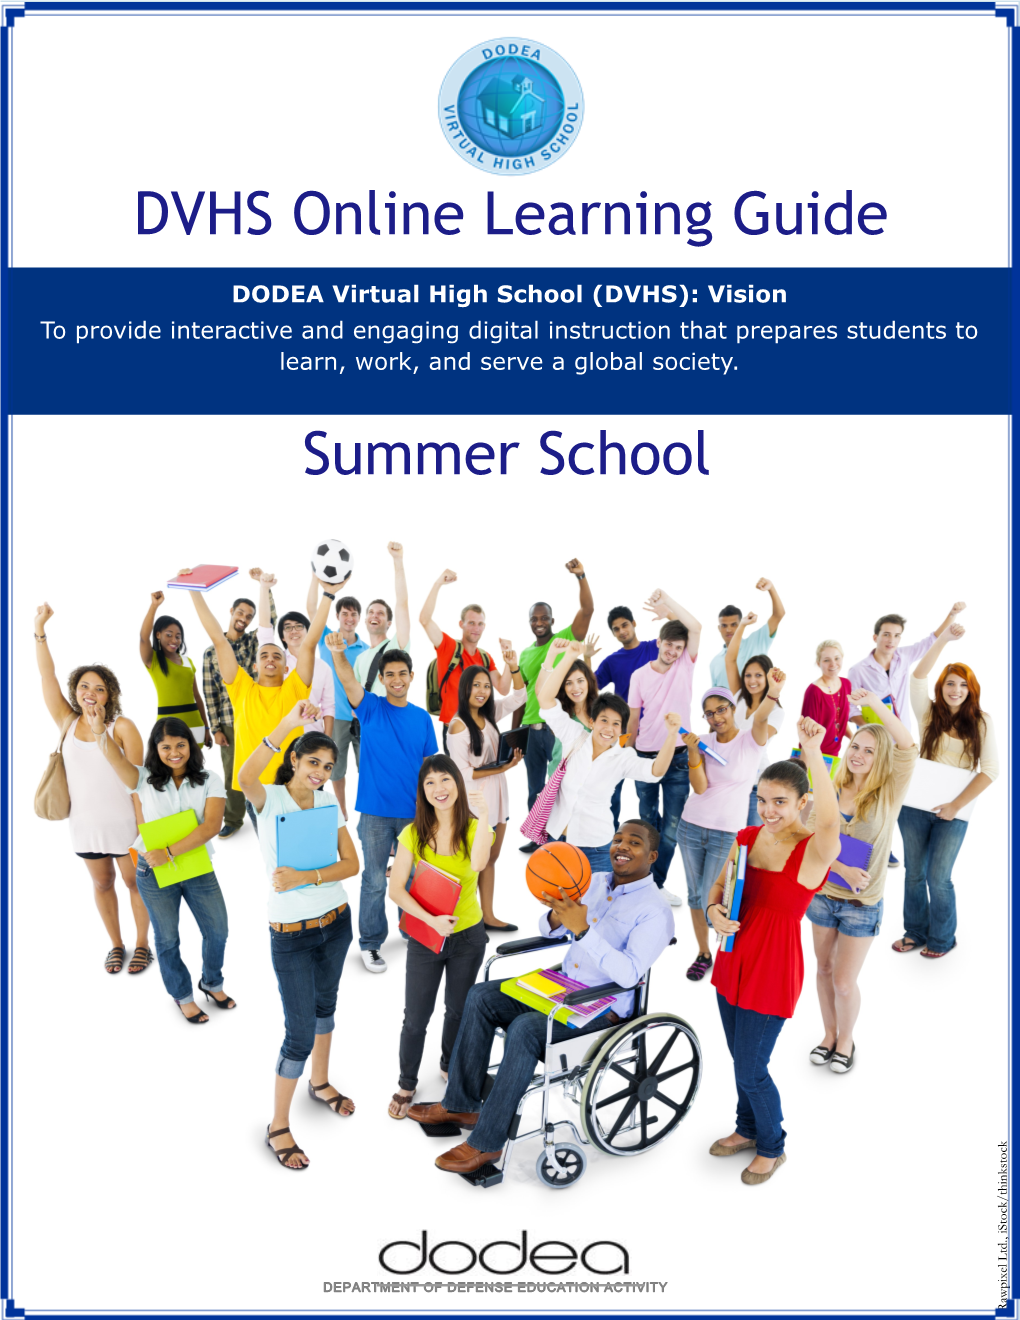 DVHS Online Learning Guide Summer School